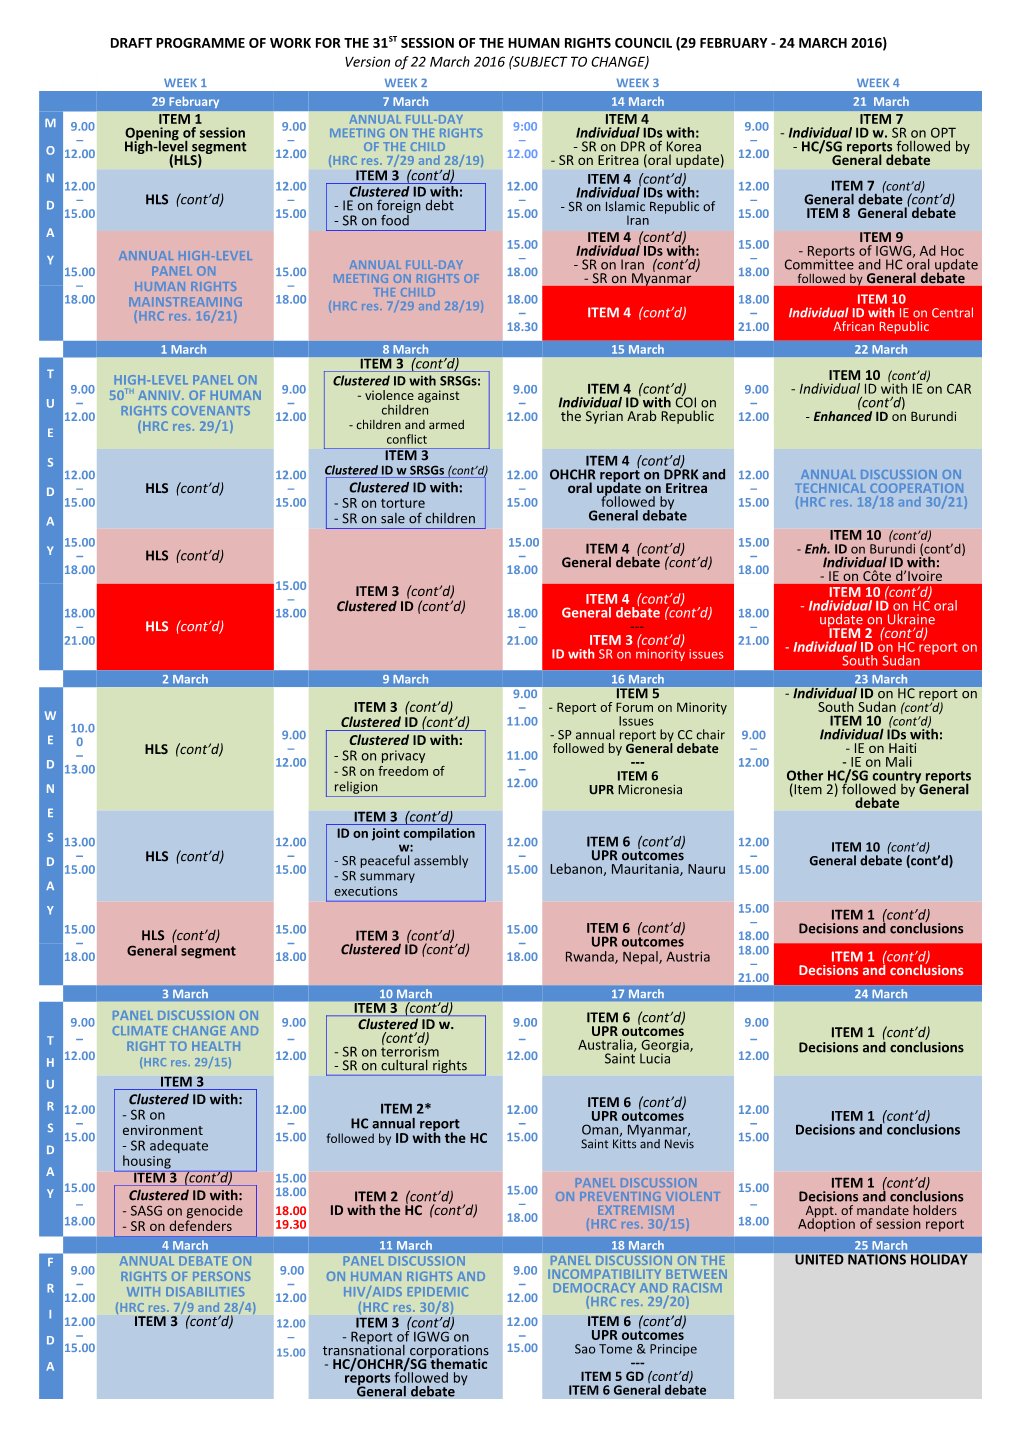 Programme of Work for the 31St Session of the Human Rights Council in English